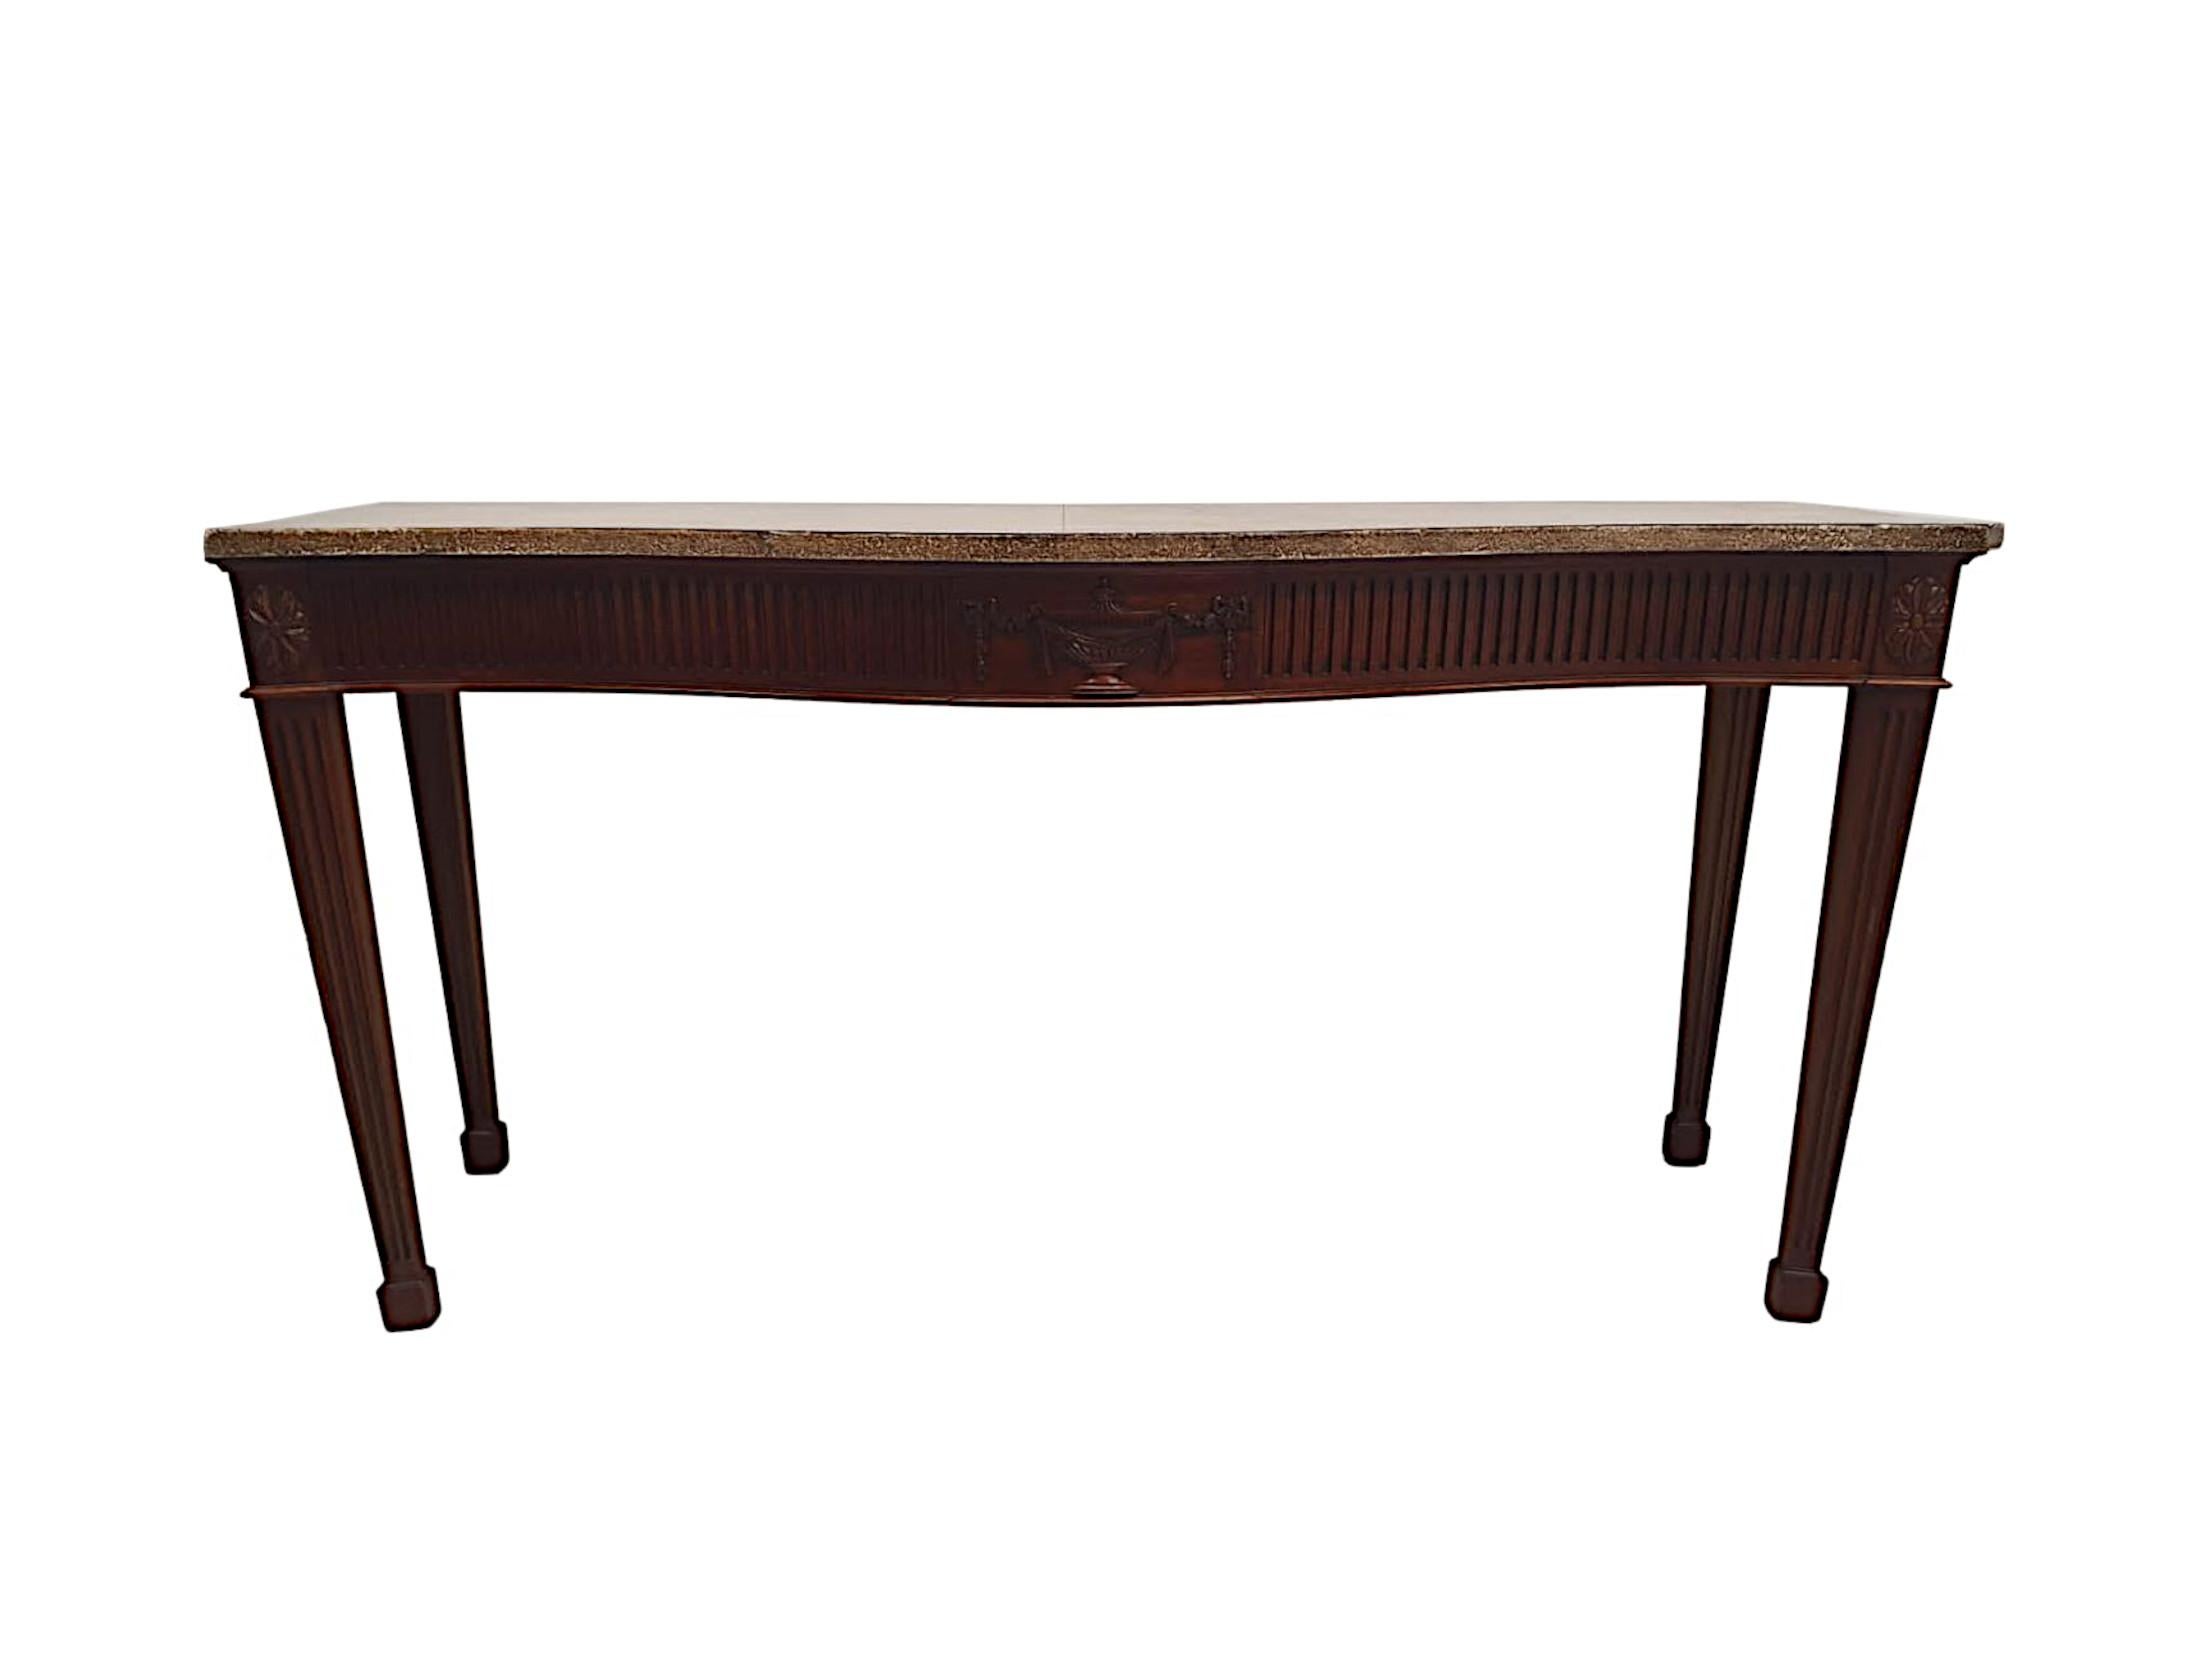 A very fine 20th Century mahogany console or hall table in the manner of Adams, of exceptional quality and beautifully carved with rich patination, grain and adorned with intricately detailed Neoclassical motifs comprising of urn, linen swags,